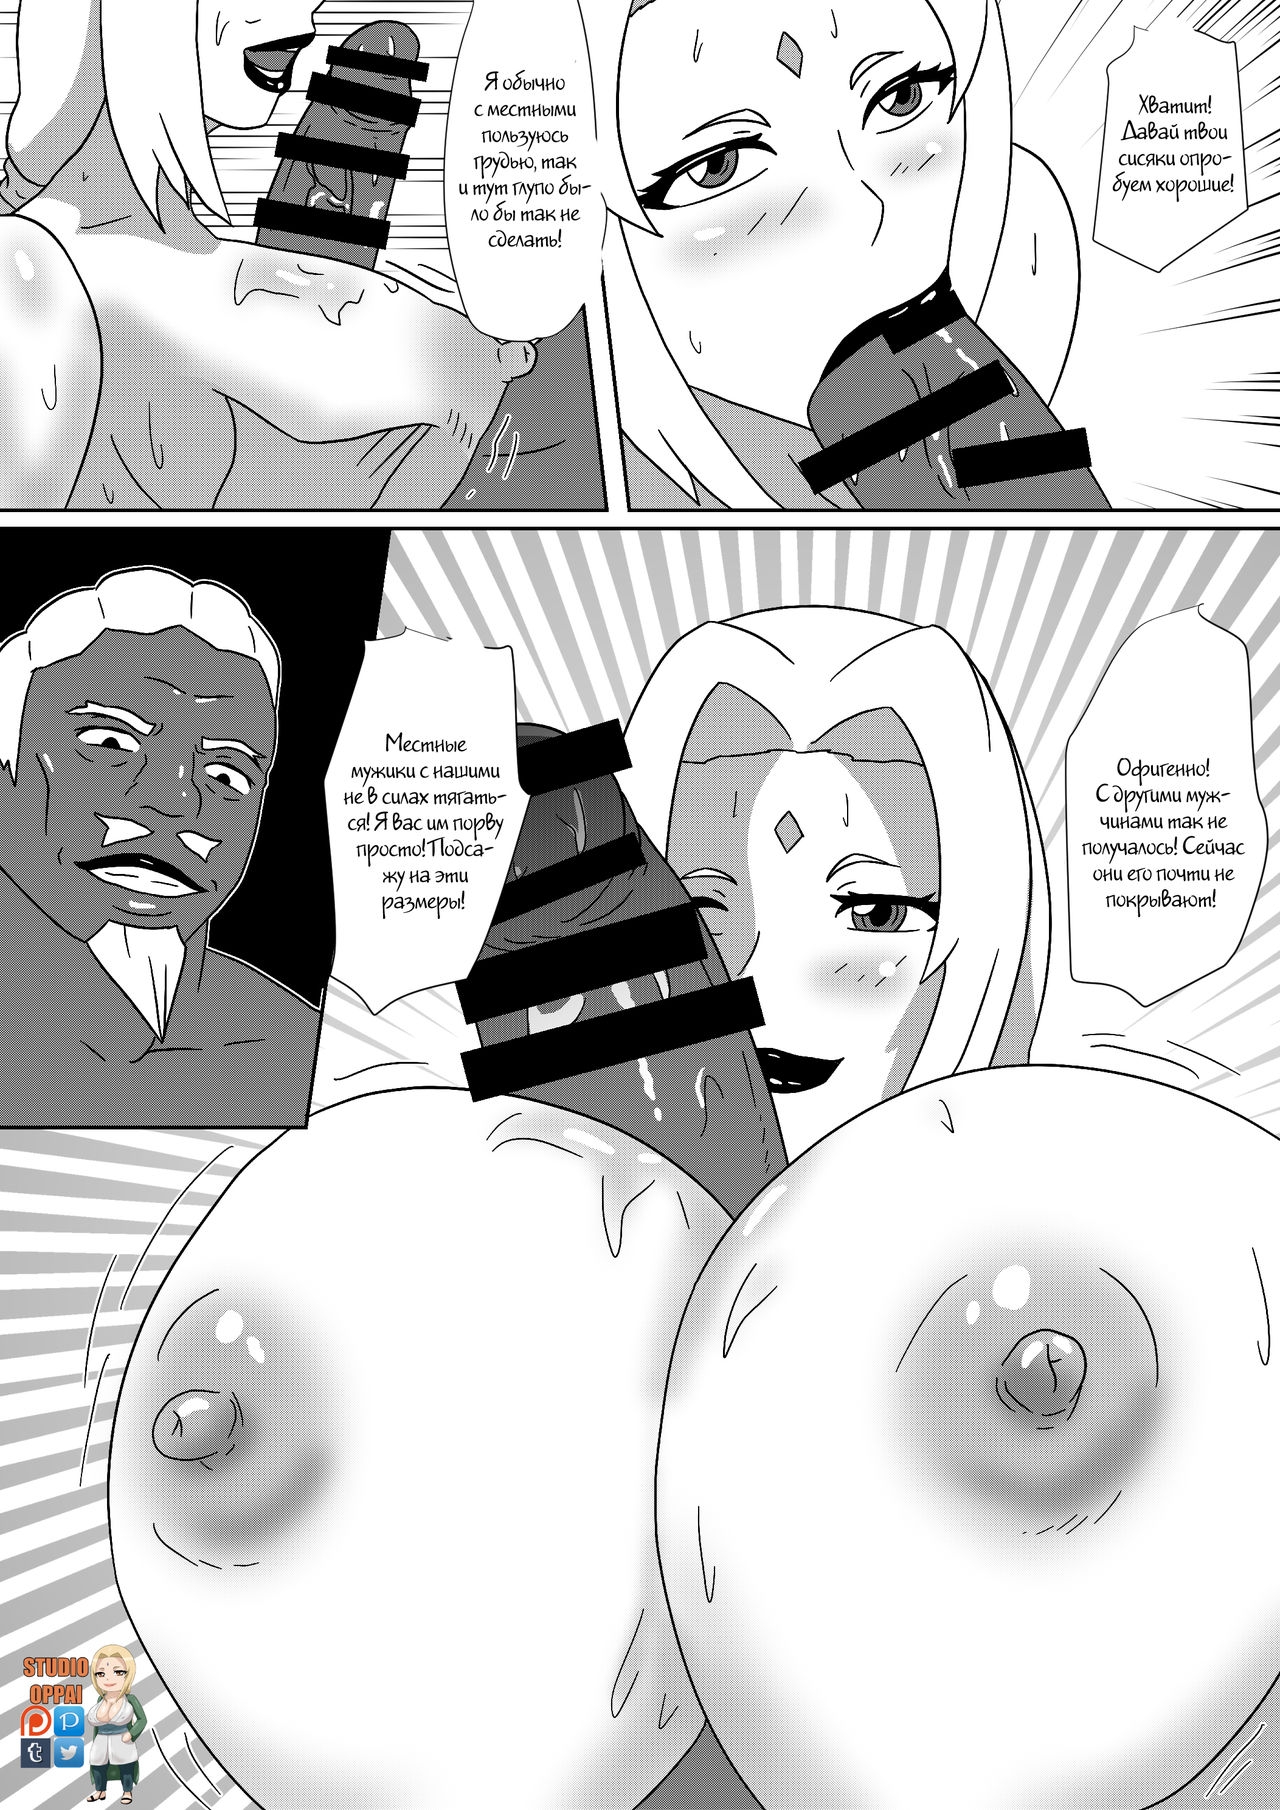 [Studio Oppai] Negotiations with Raikage (Naruto) [Russian] [Witcher000] 3